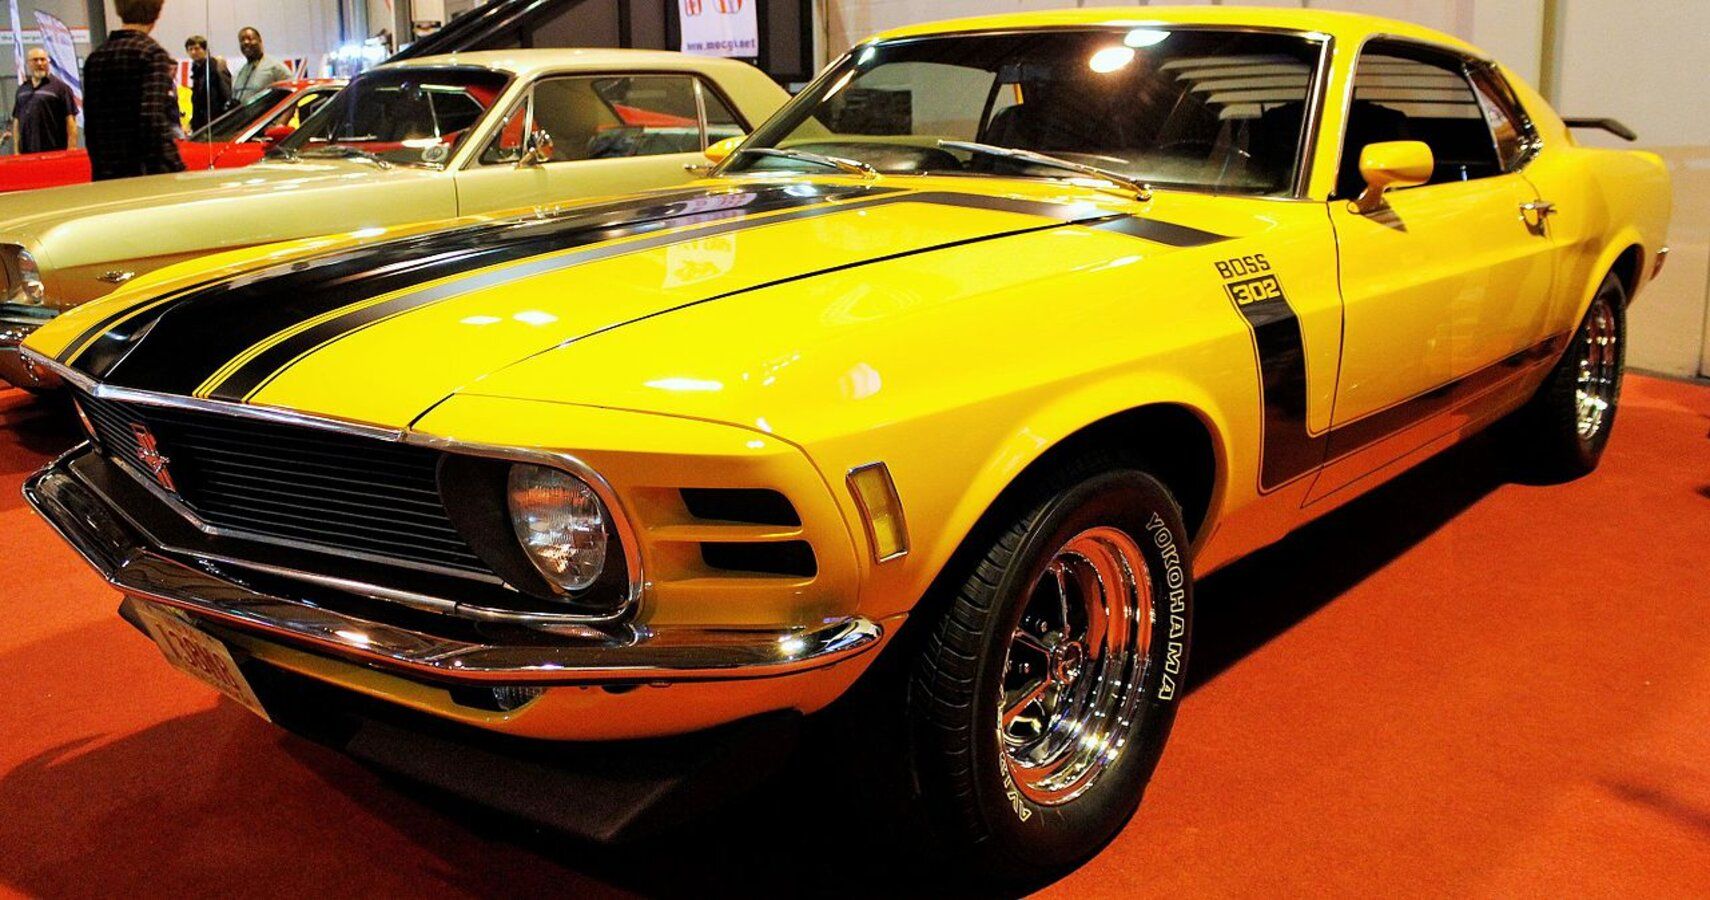 How much is the Boss 302 Mustang worth today?